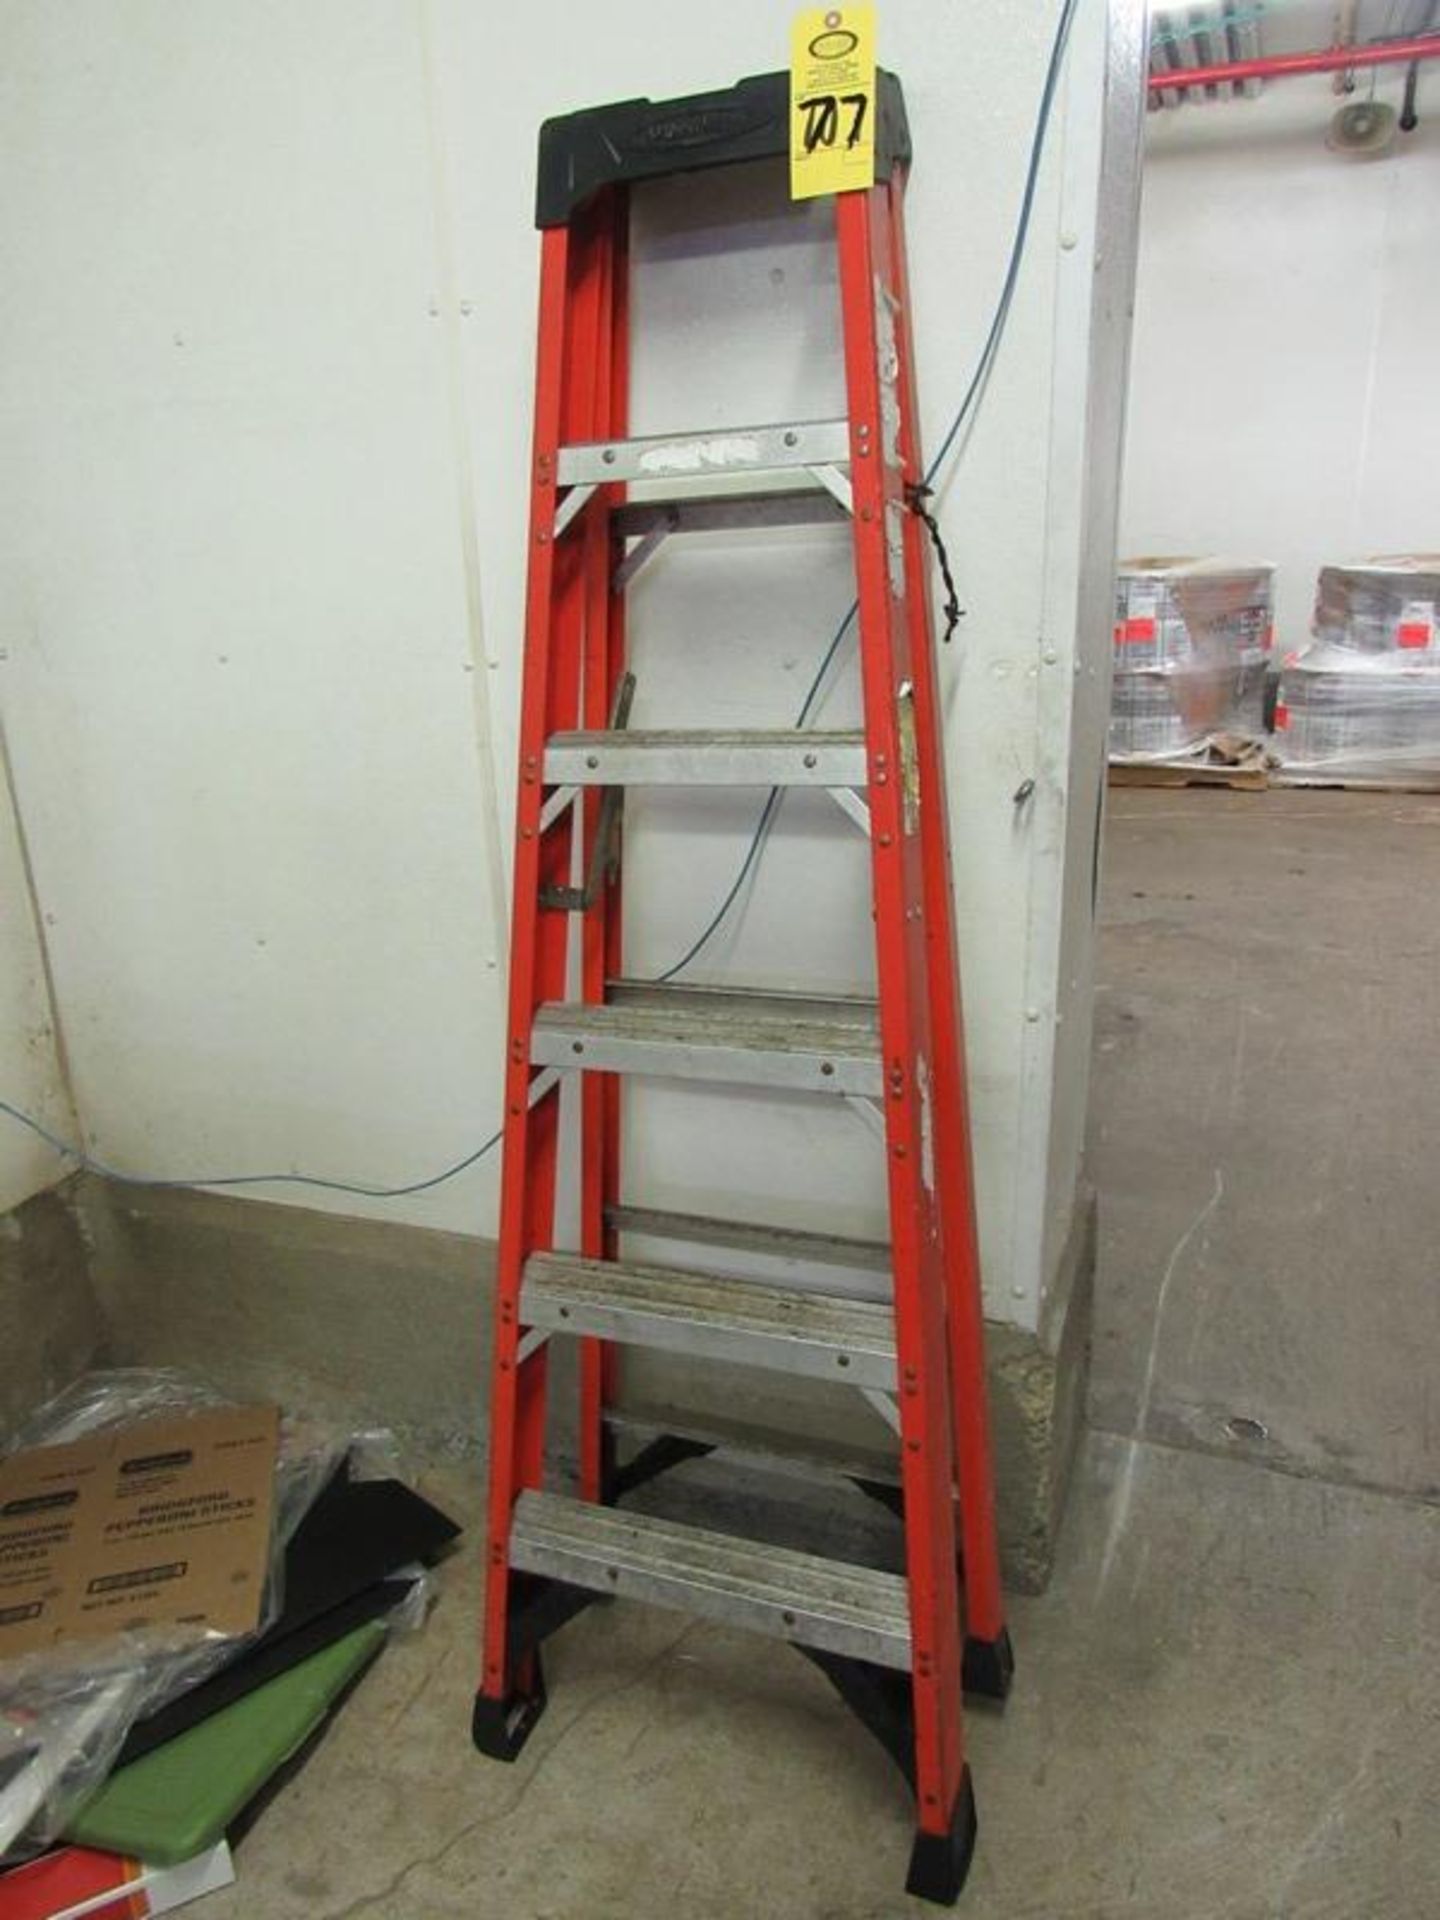 Werner 6' Fiberglass Ladders (1) on 1st floor - (1) on 2nd floor (Required Rigging Fee: $10 - Image 2 of 2